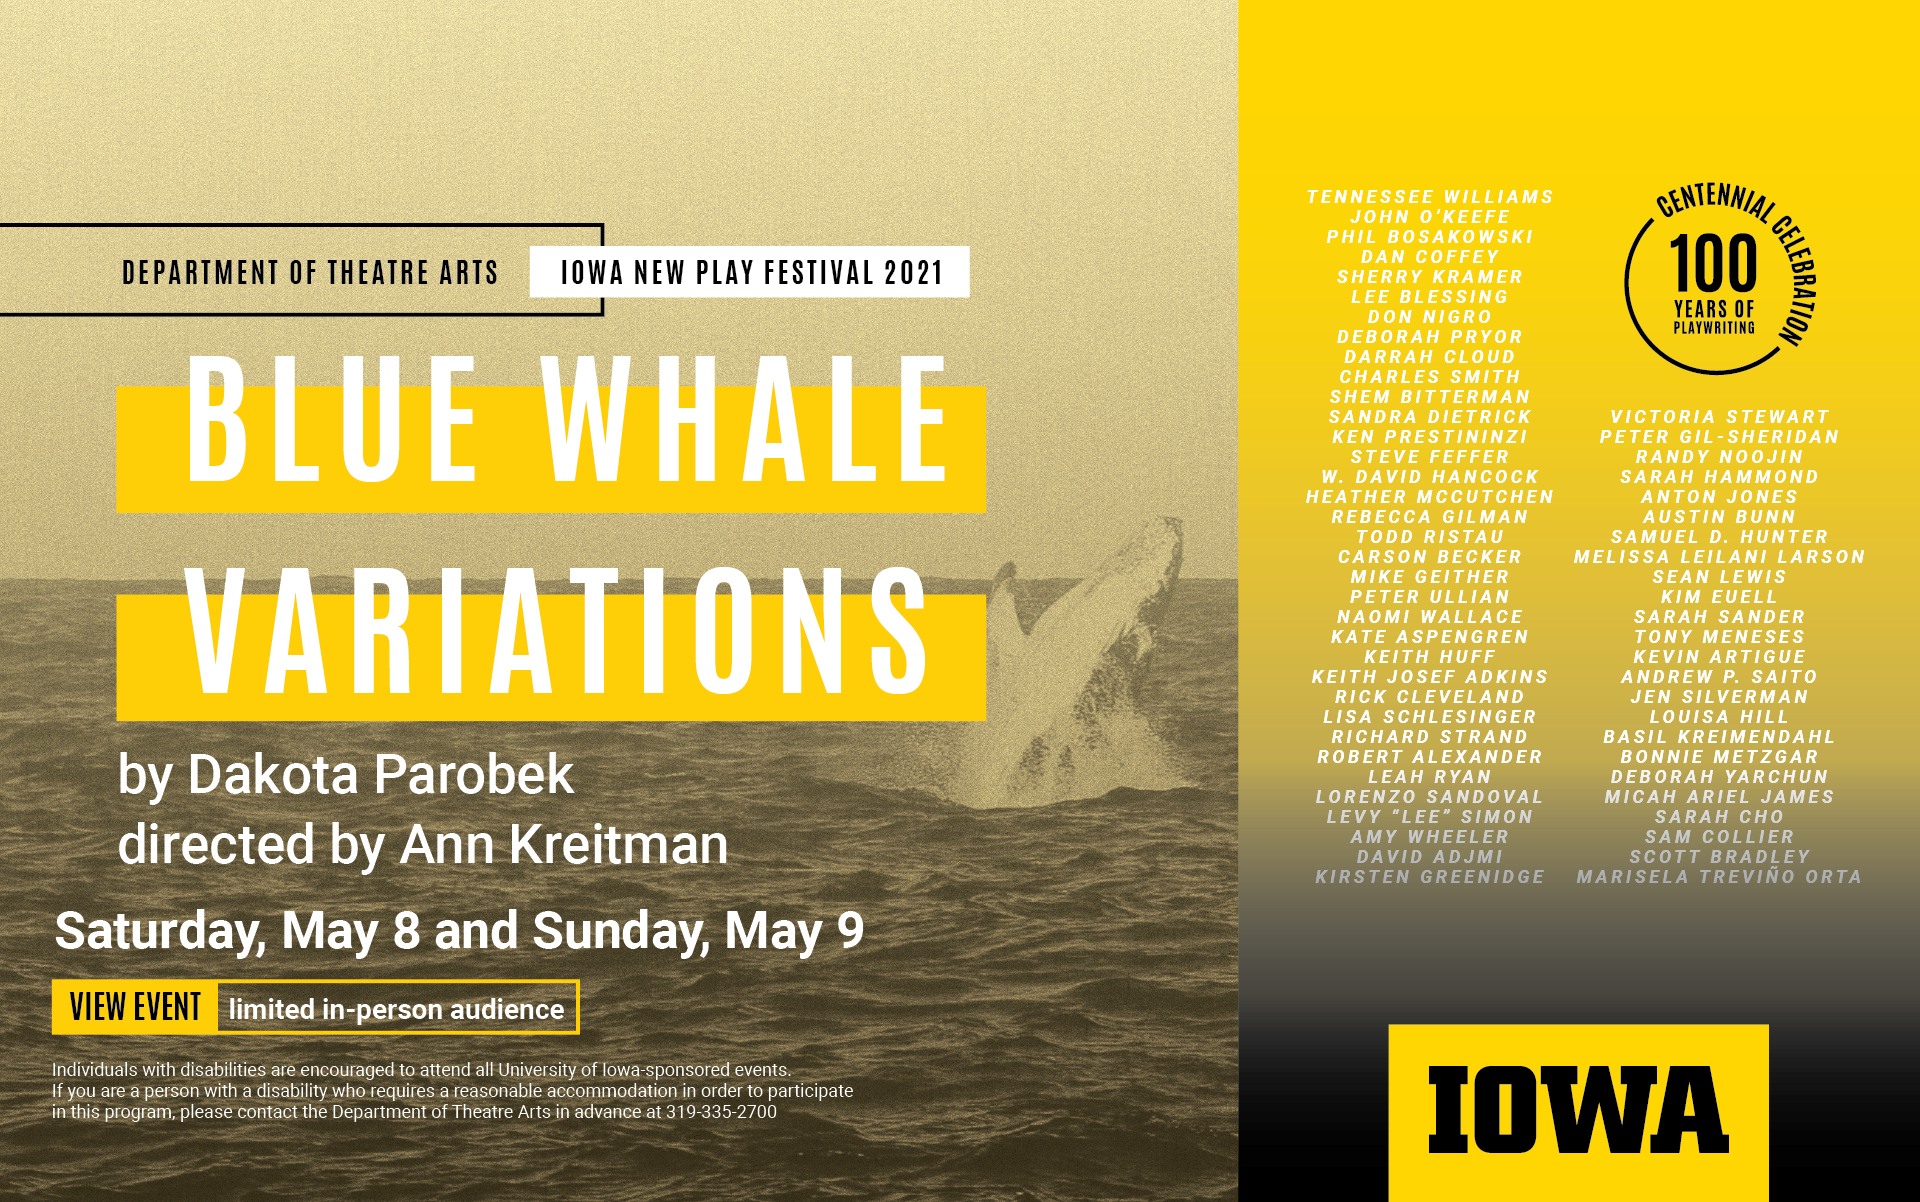 Blue Whale Variations. By Dakota Parobek. Directed by Ann Kreitman. Saturday, May 8 and Sunday, May 9. Limited in-perosn audience. Image of whale jumping in the ocean.